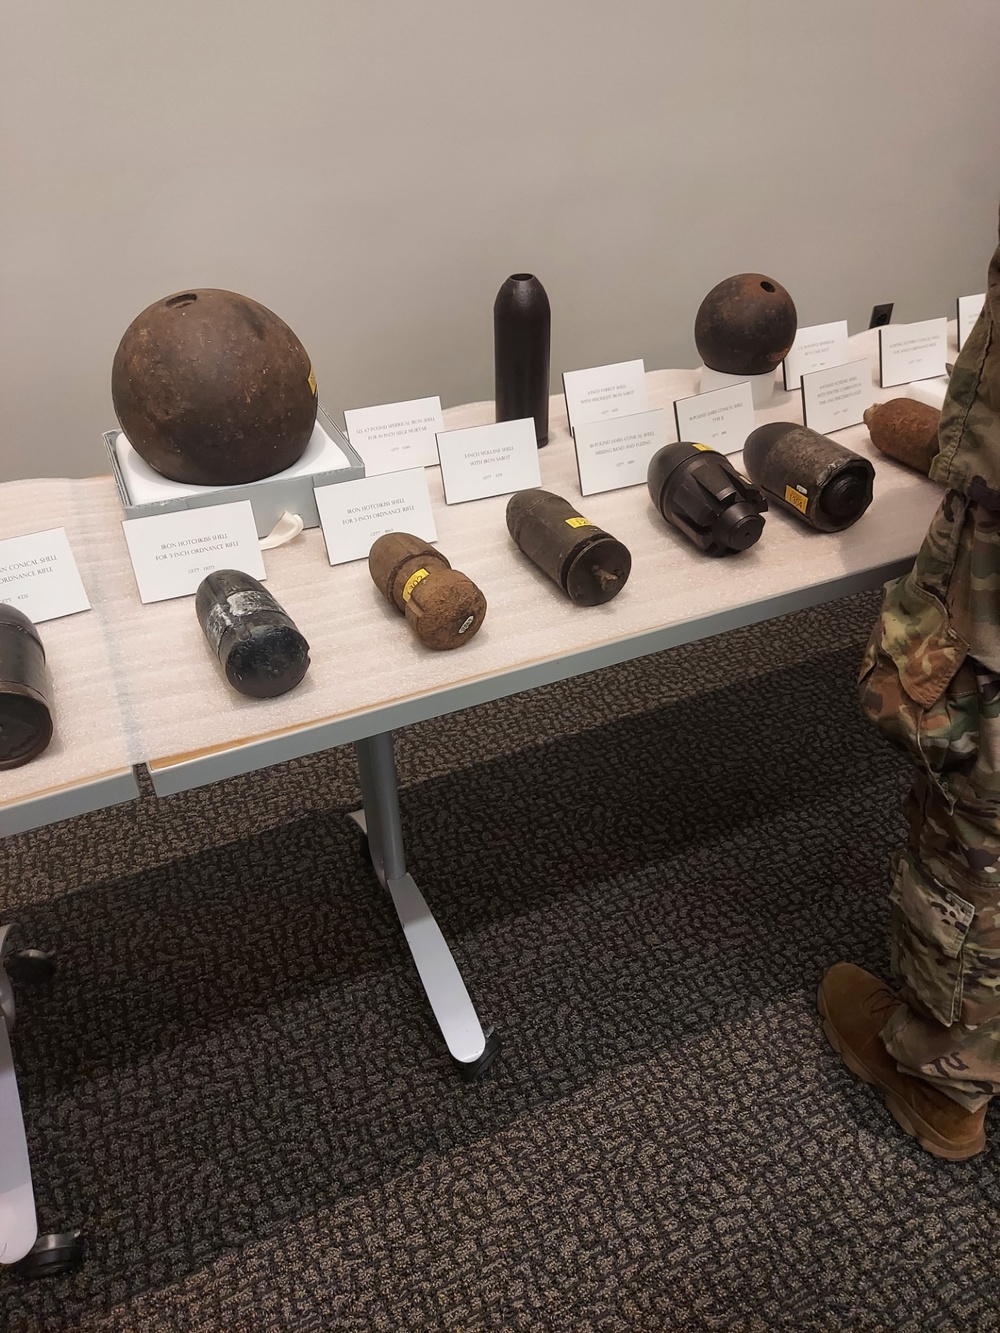 Bomb squad personnel attend unexploded ordnance course at Gettysburg Museum